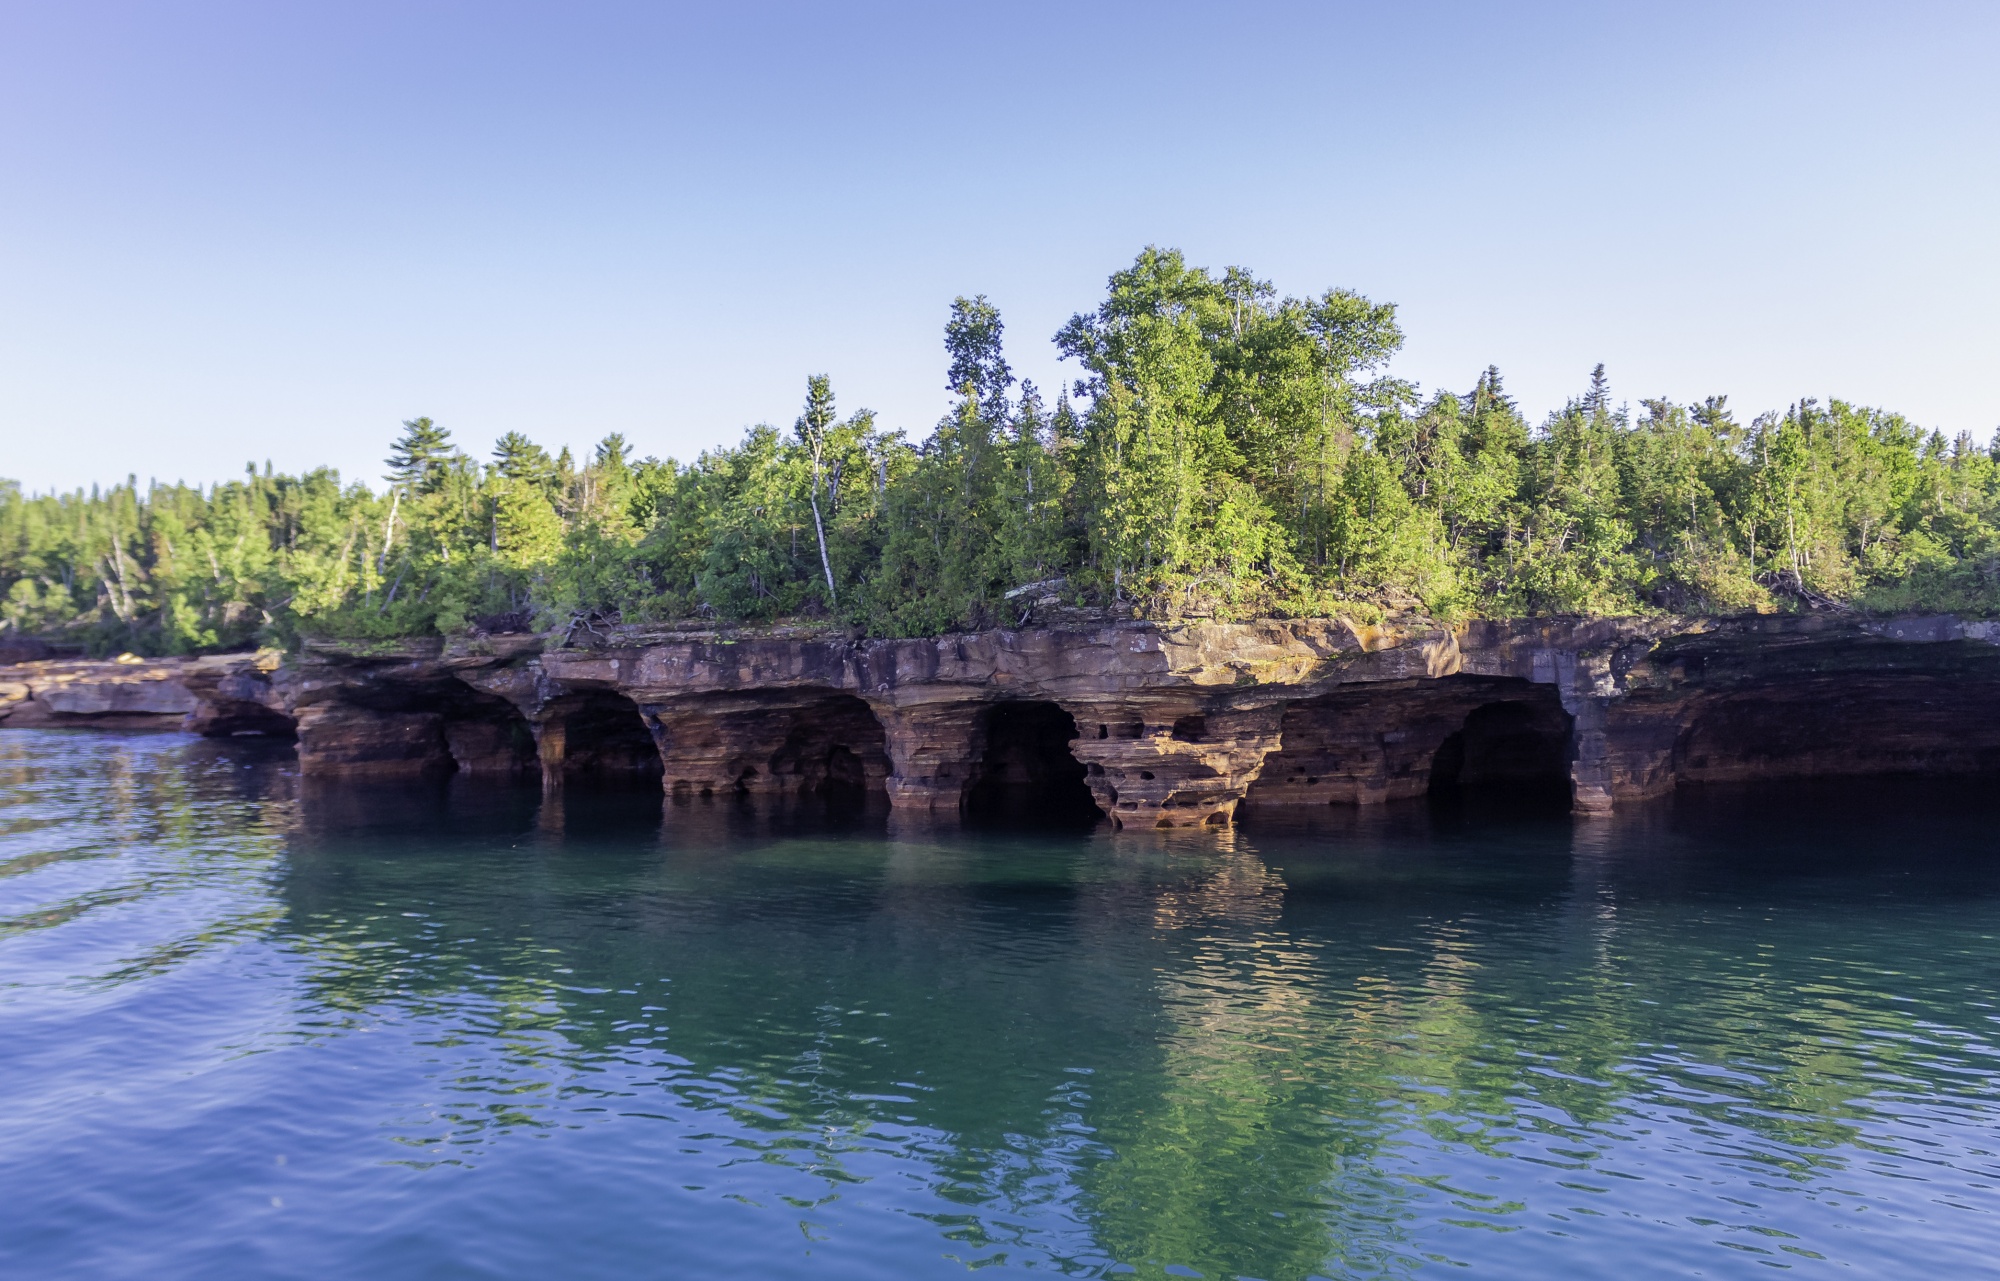 Best remote destinations, underwater rock formations in Apostle Islands National Lakeshore Wisconsin 